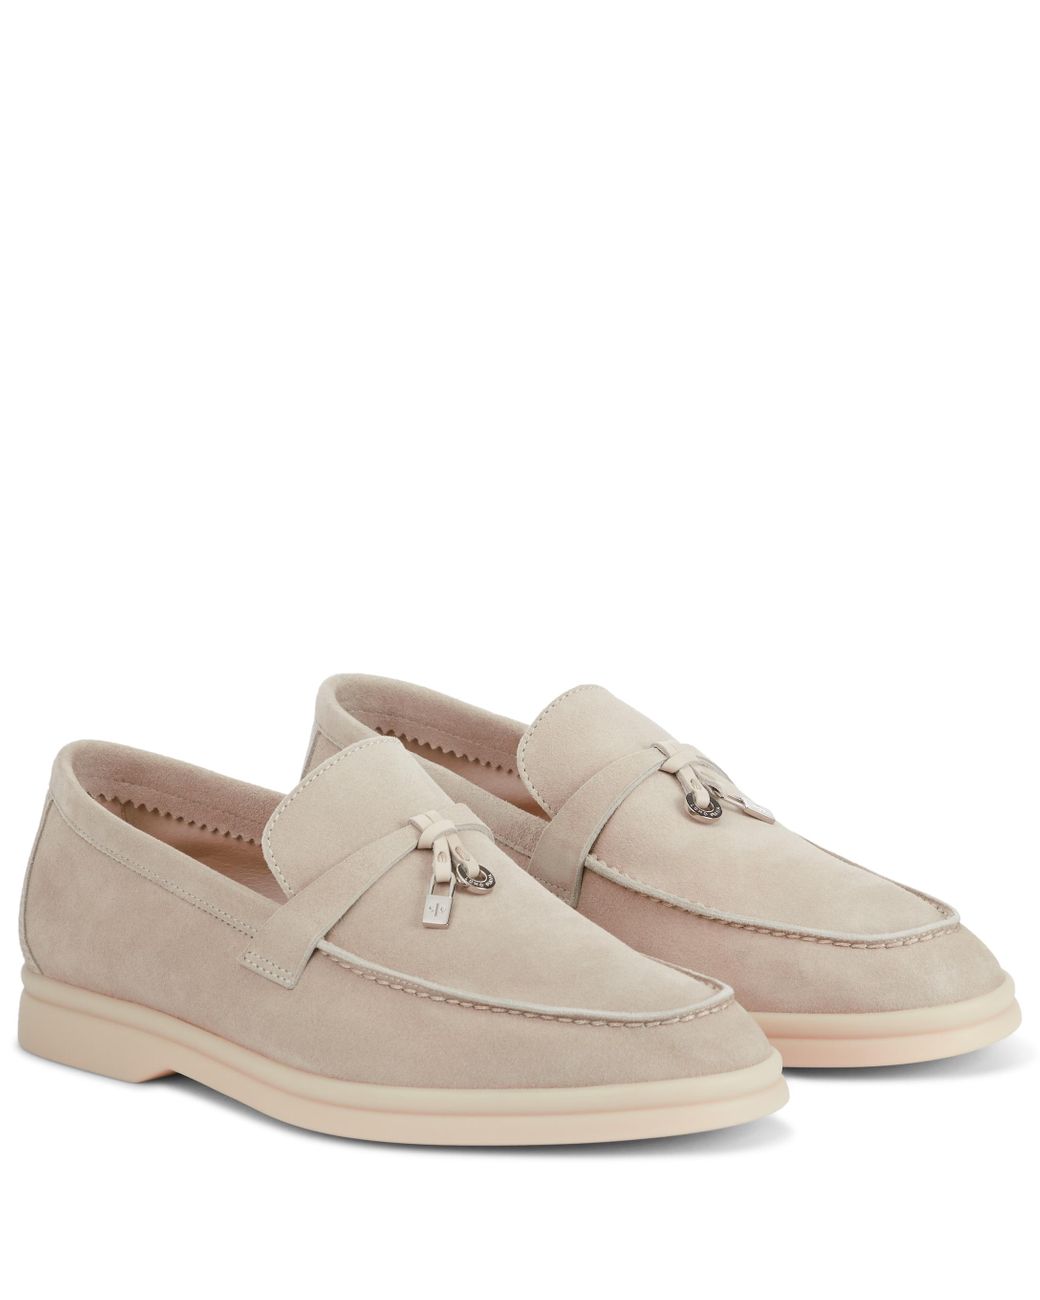 Loro Piana Exclusive To Mytheresa – Summer Charms Walk Suede Loafers in ...